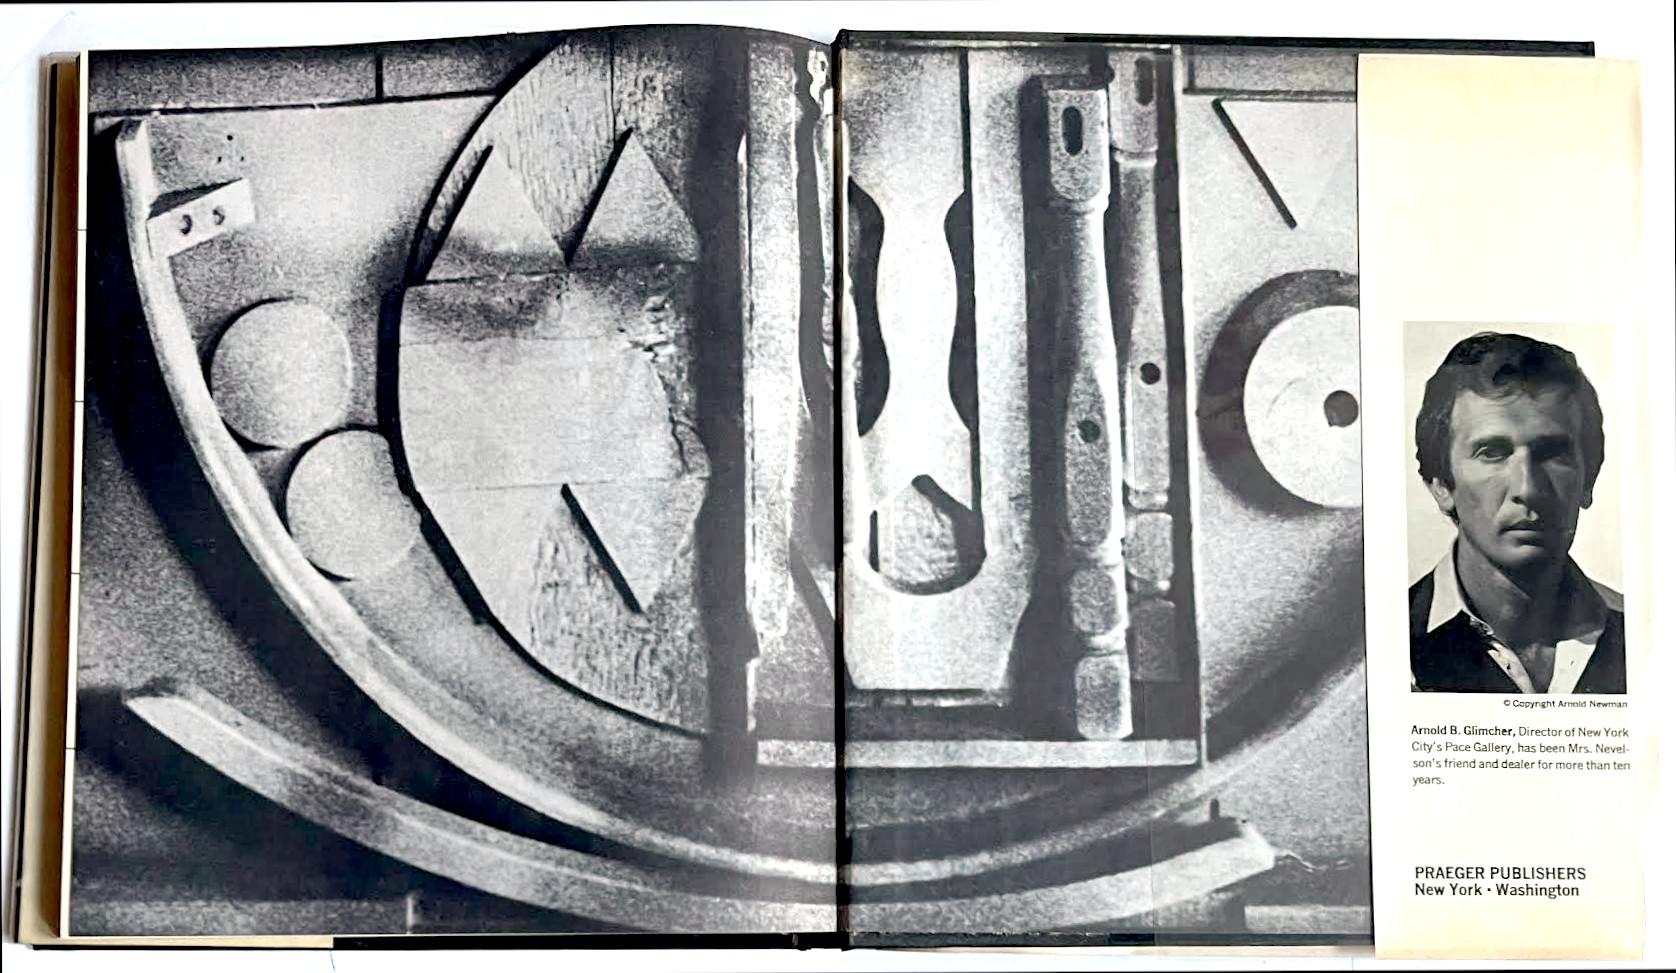 Louise Nevelson (Hand signed by BOTH Arne Glimcher and Louise Nevelson) 11